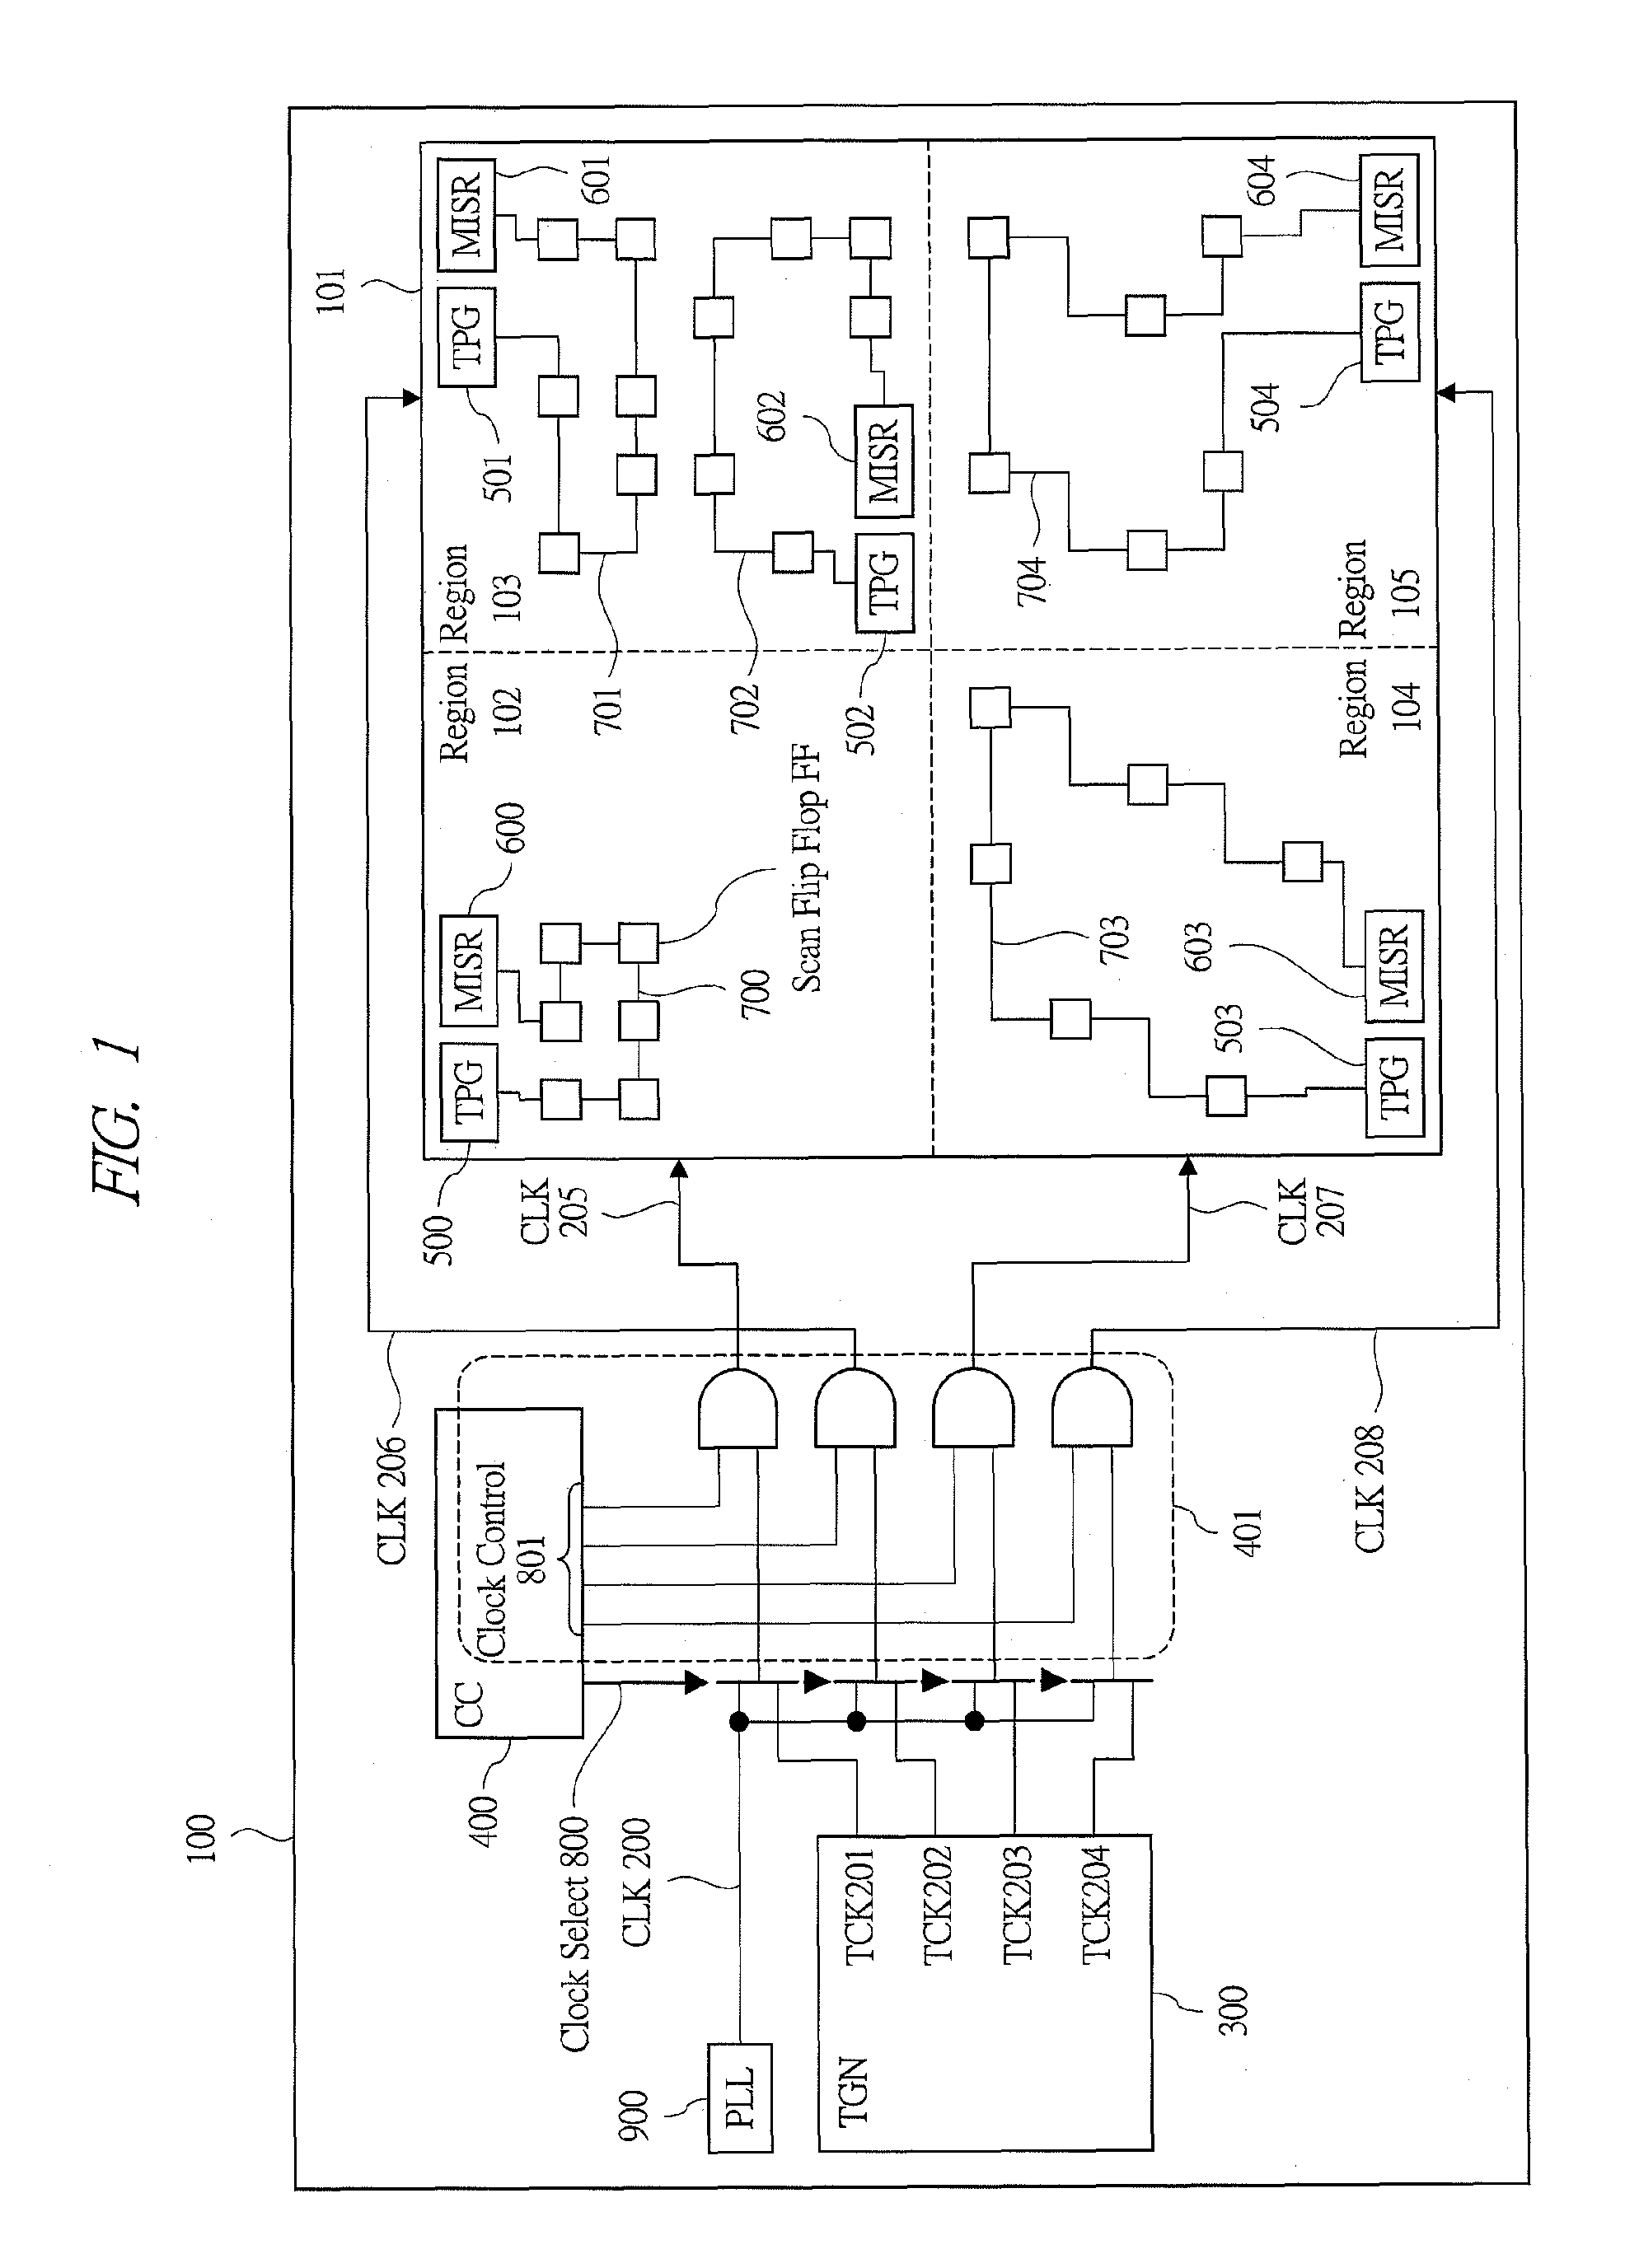 Semiconductor integrated circuit device for scan testing